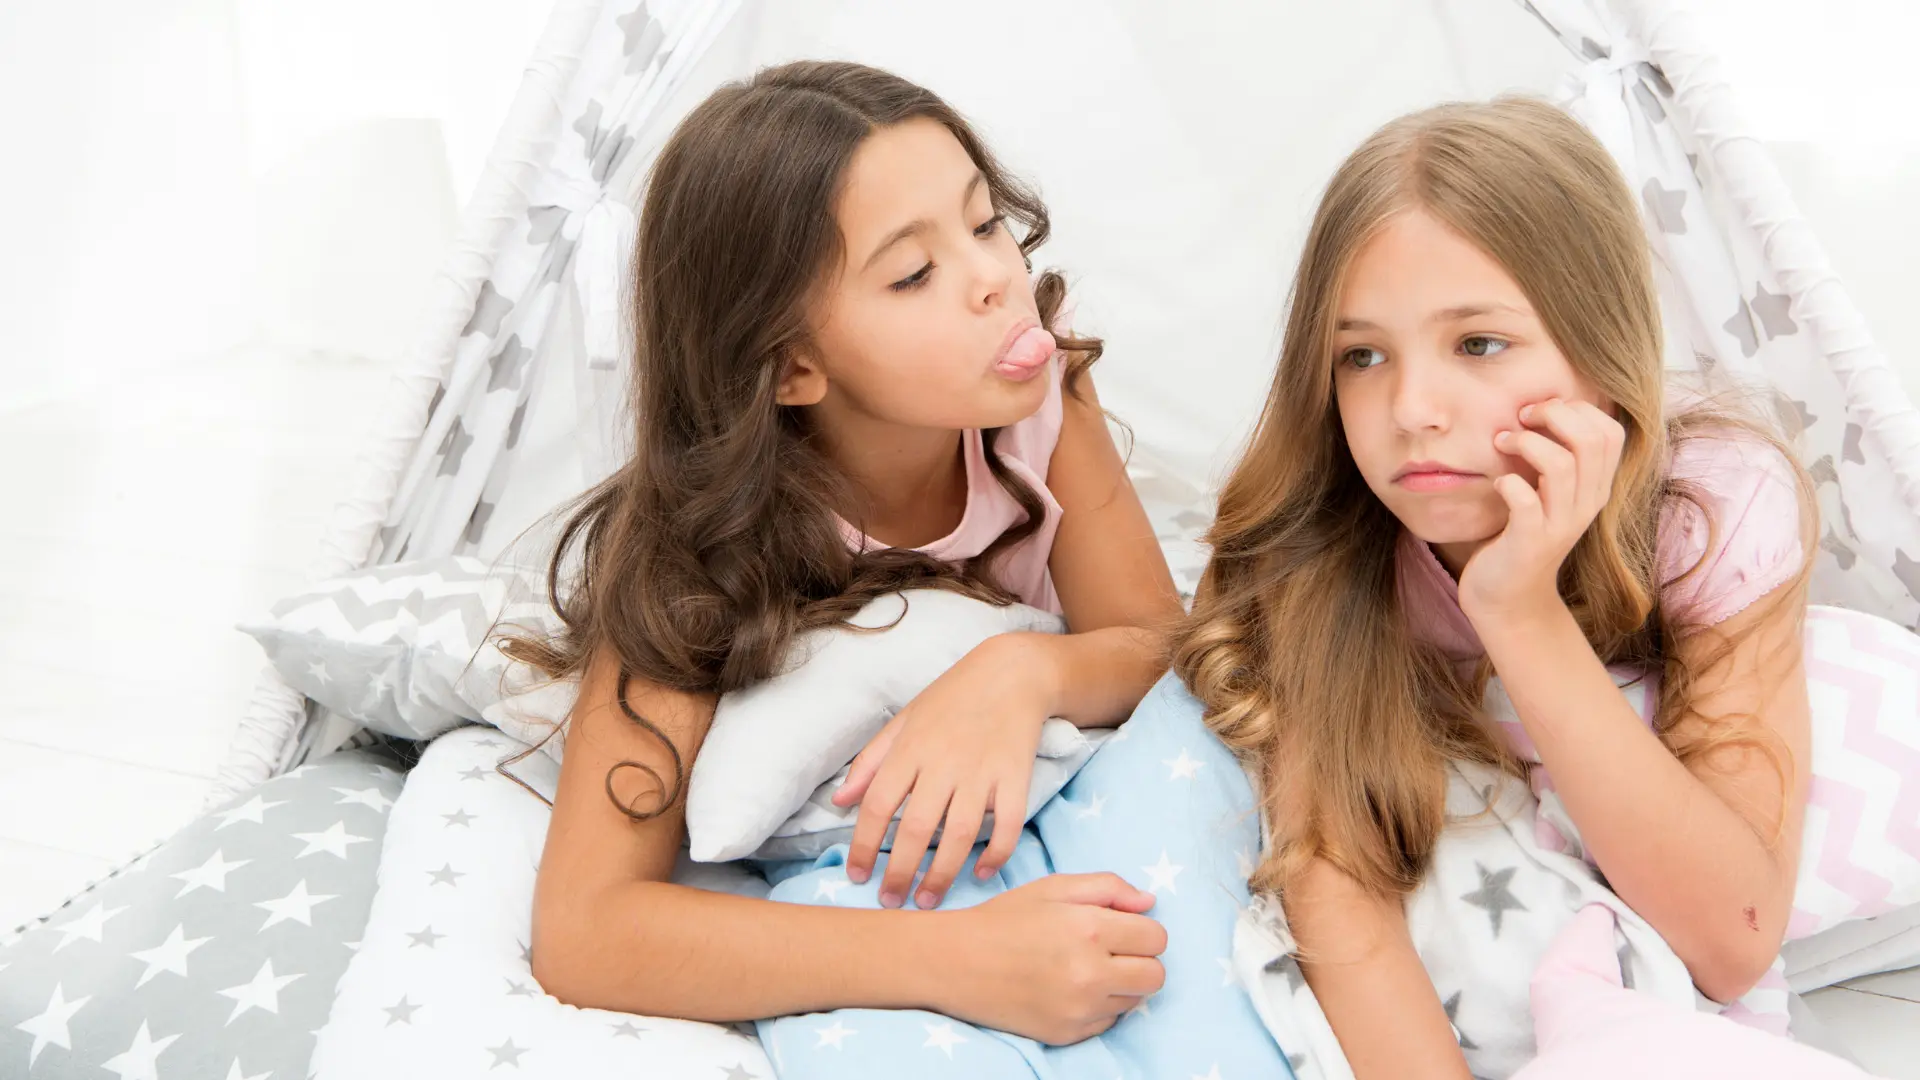 Stepsibling Rivalry and Bullying in Blended Families